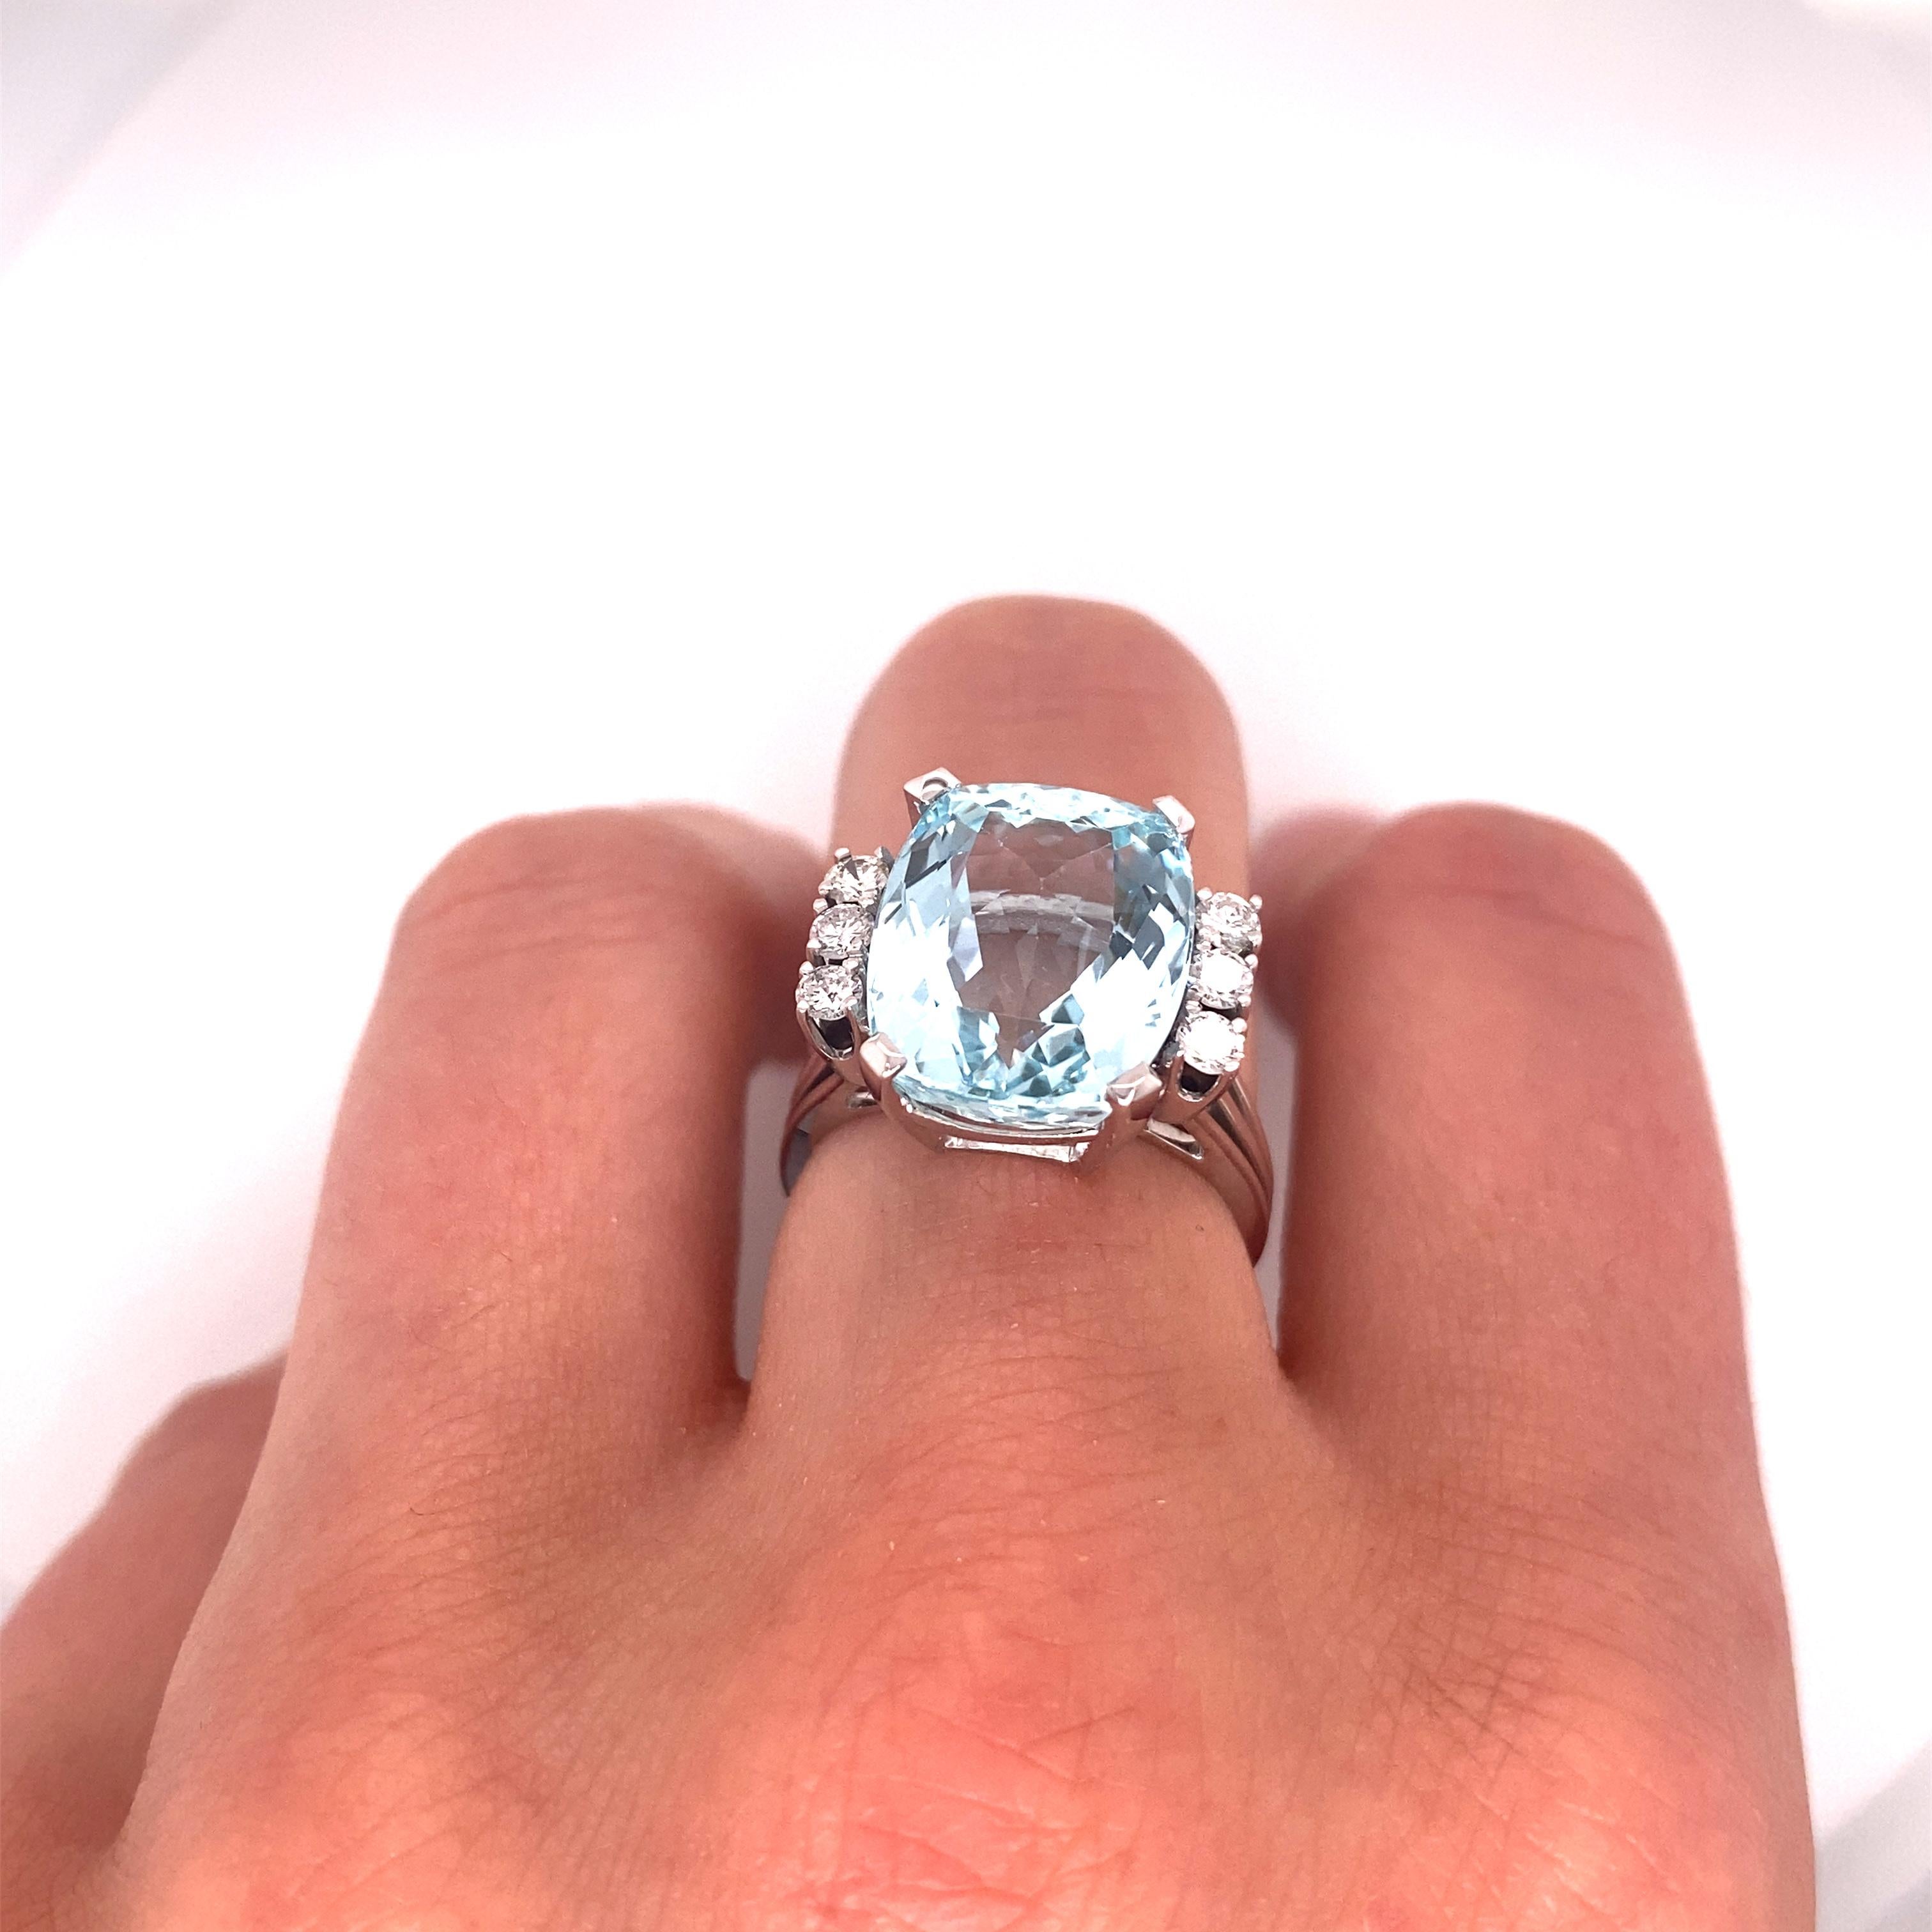 Vintage 1960's 7.35ct Cushion Cut Aquamarine Ring with Diamonds For Sale 2